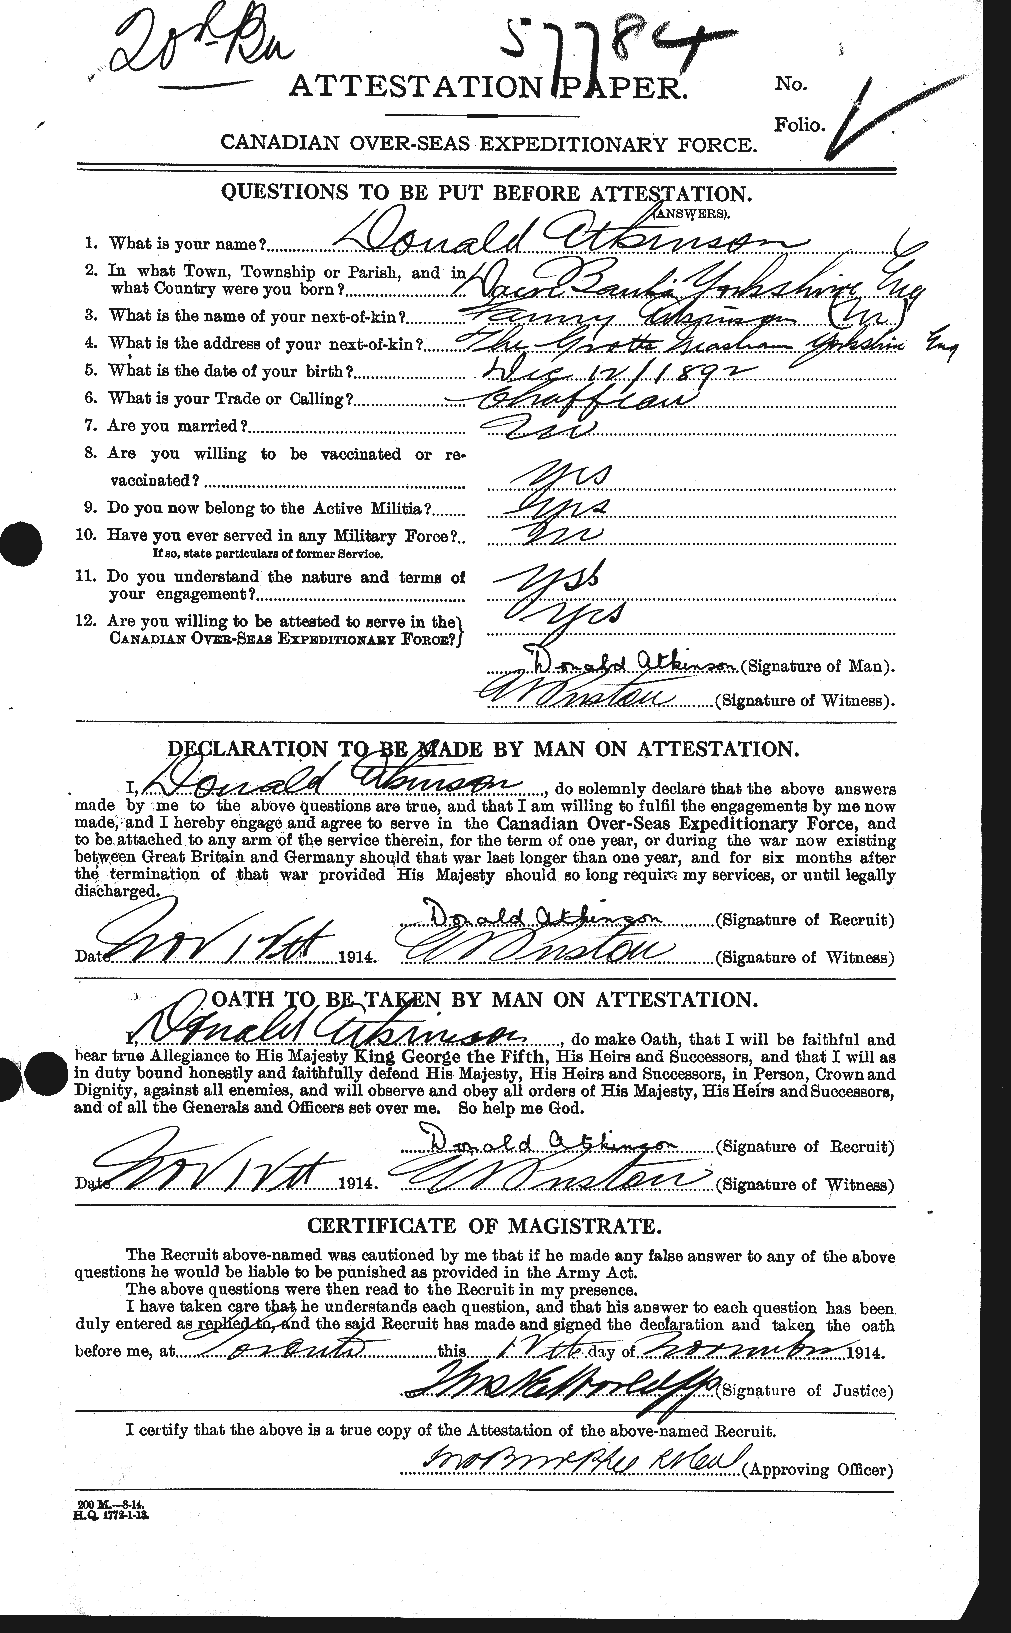 Personnel Records of the First World War - CEF 217503a